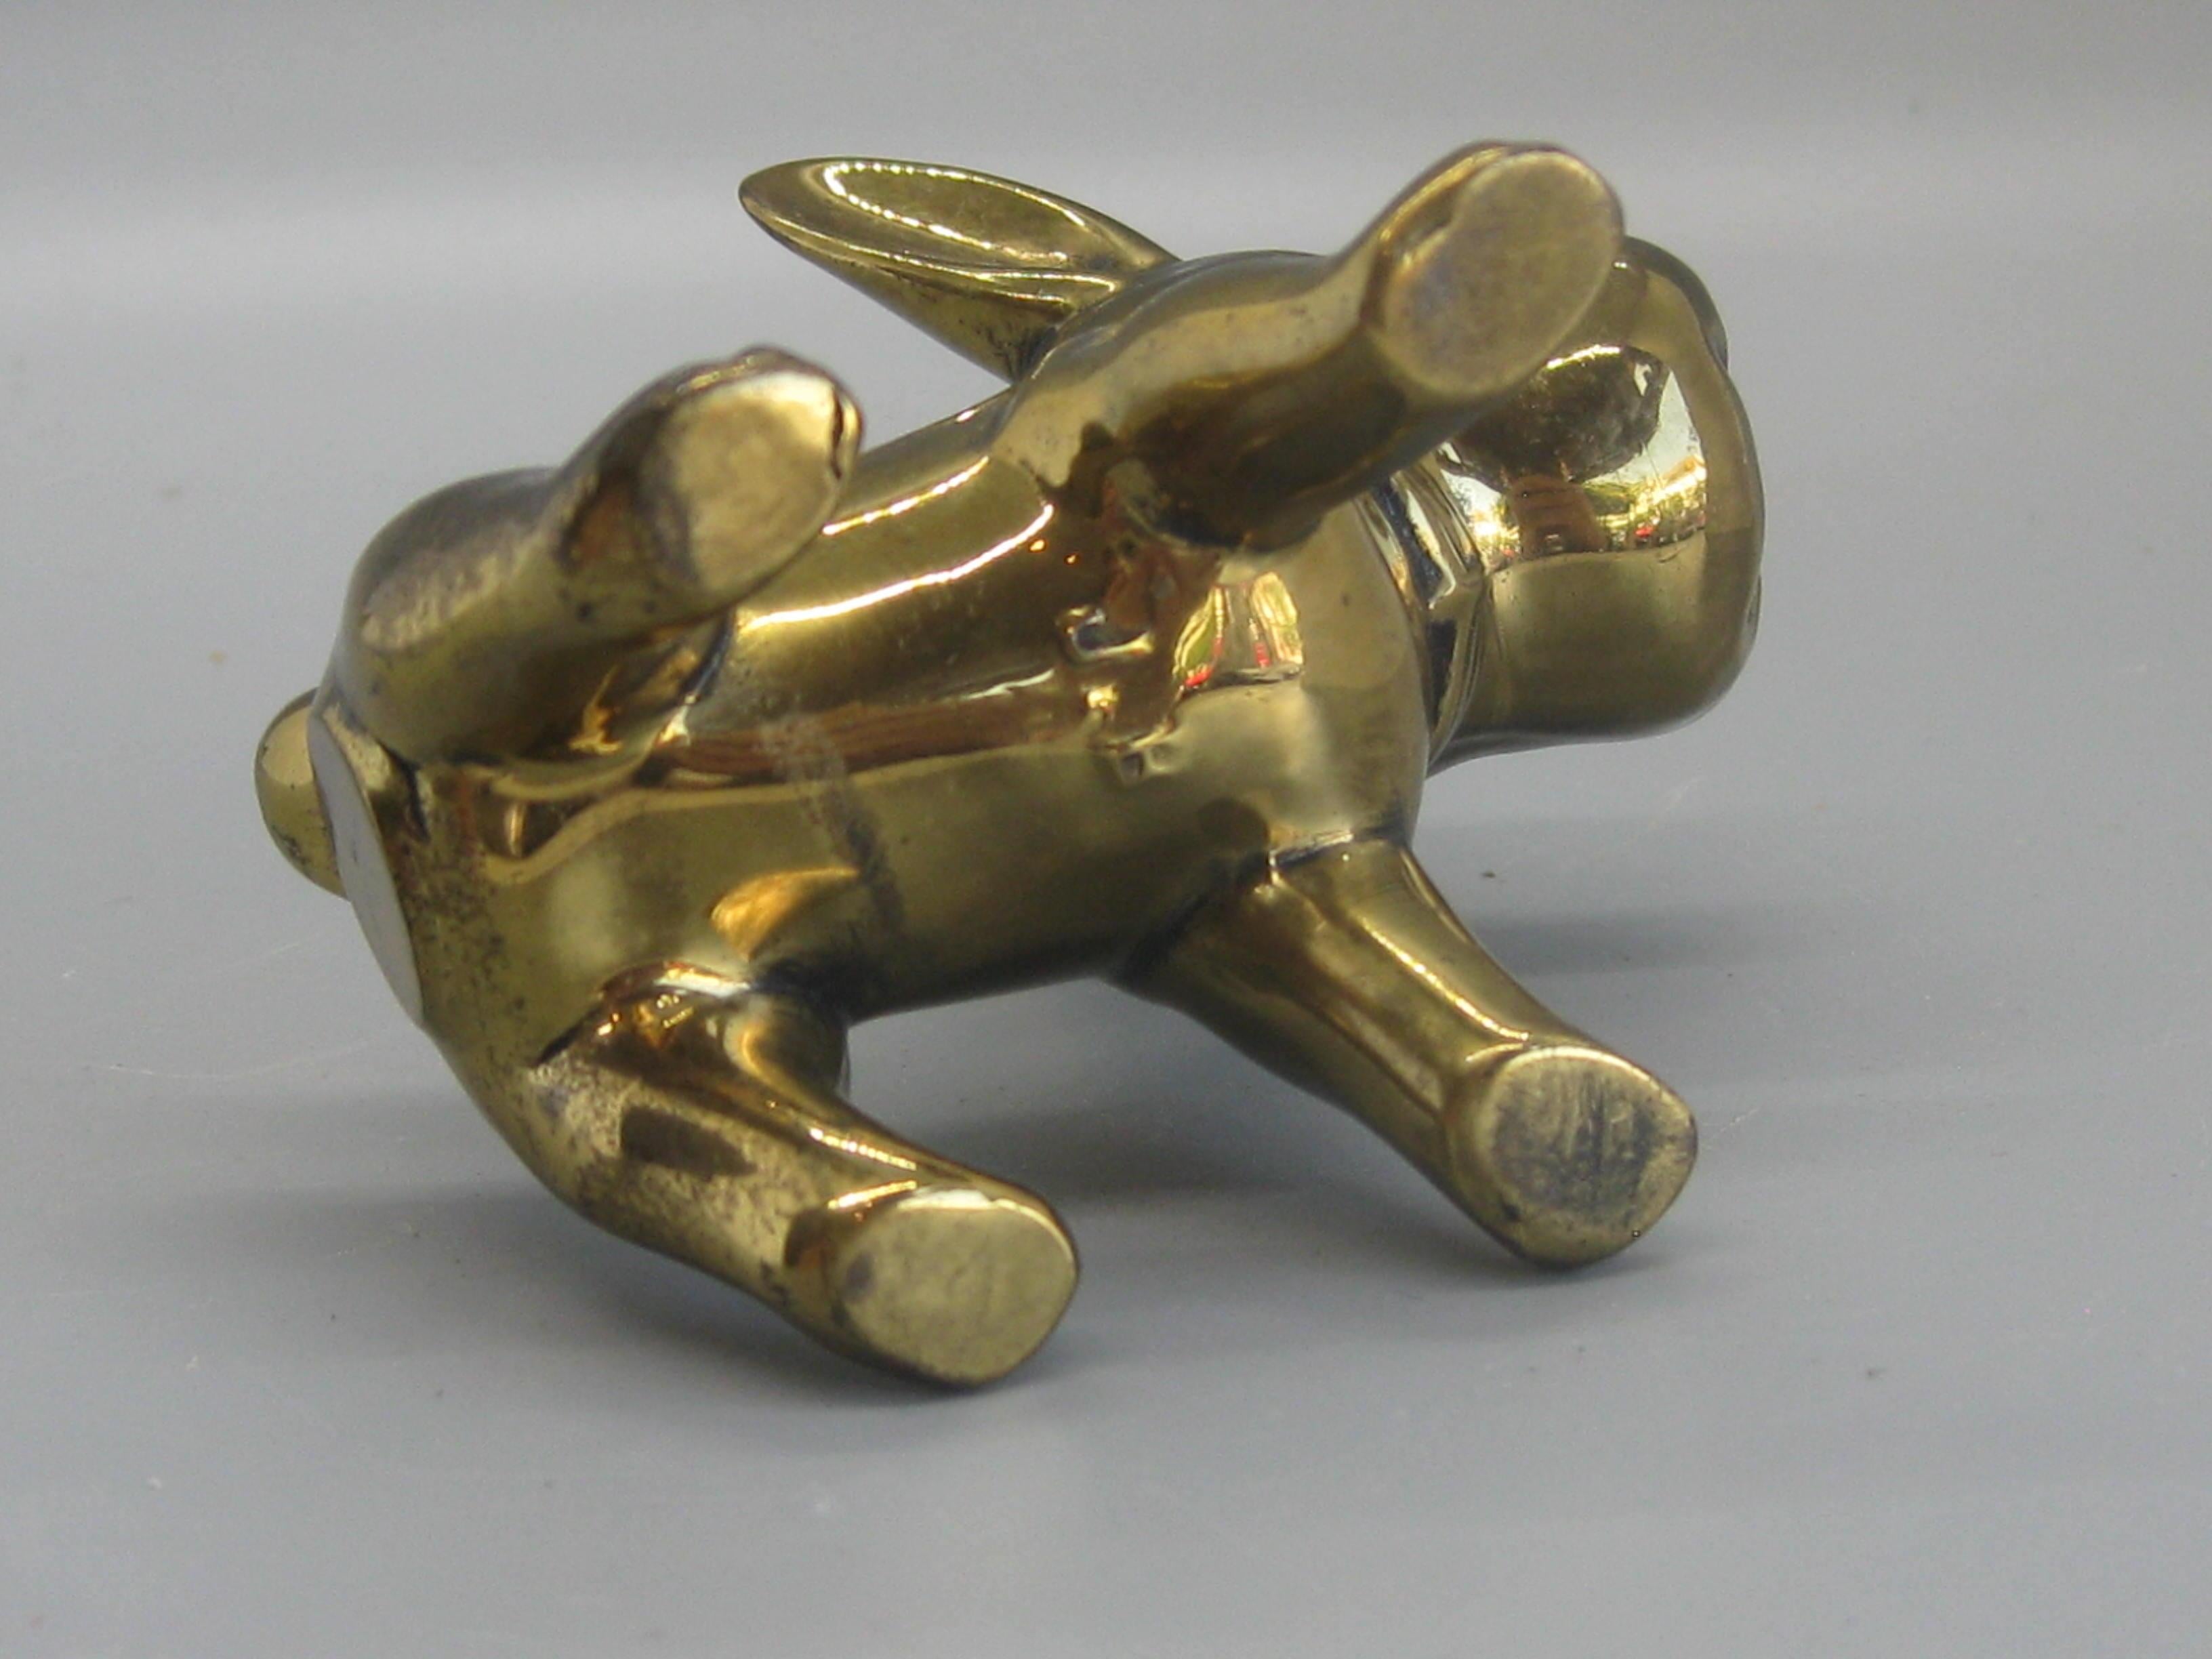 Antique Art Deco Jennings Brothers French Bulldog Dog Figural Brass Sculpture For Sale 3